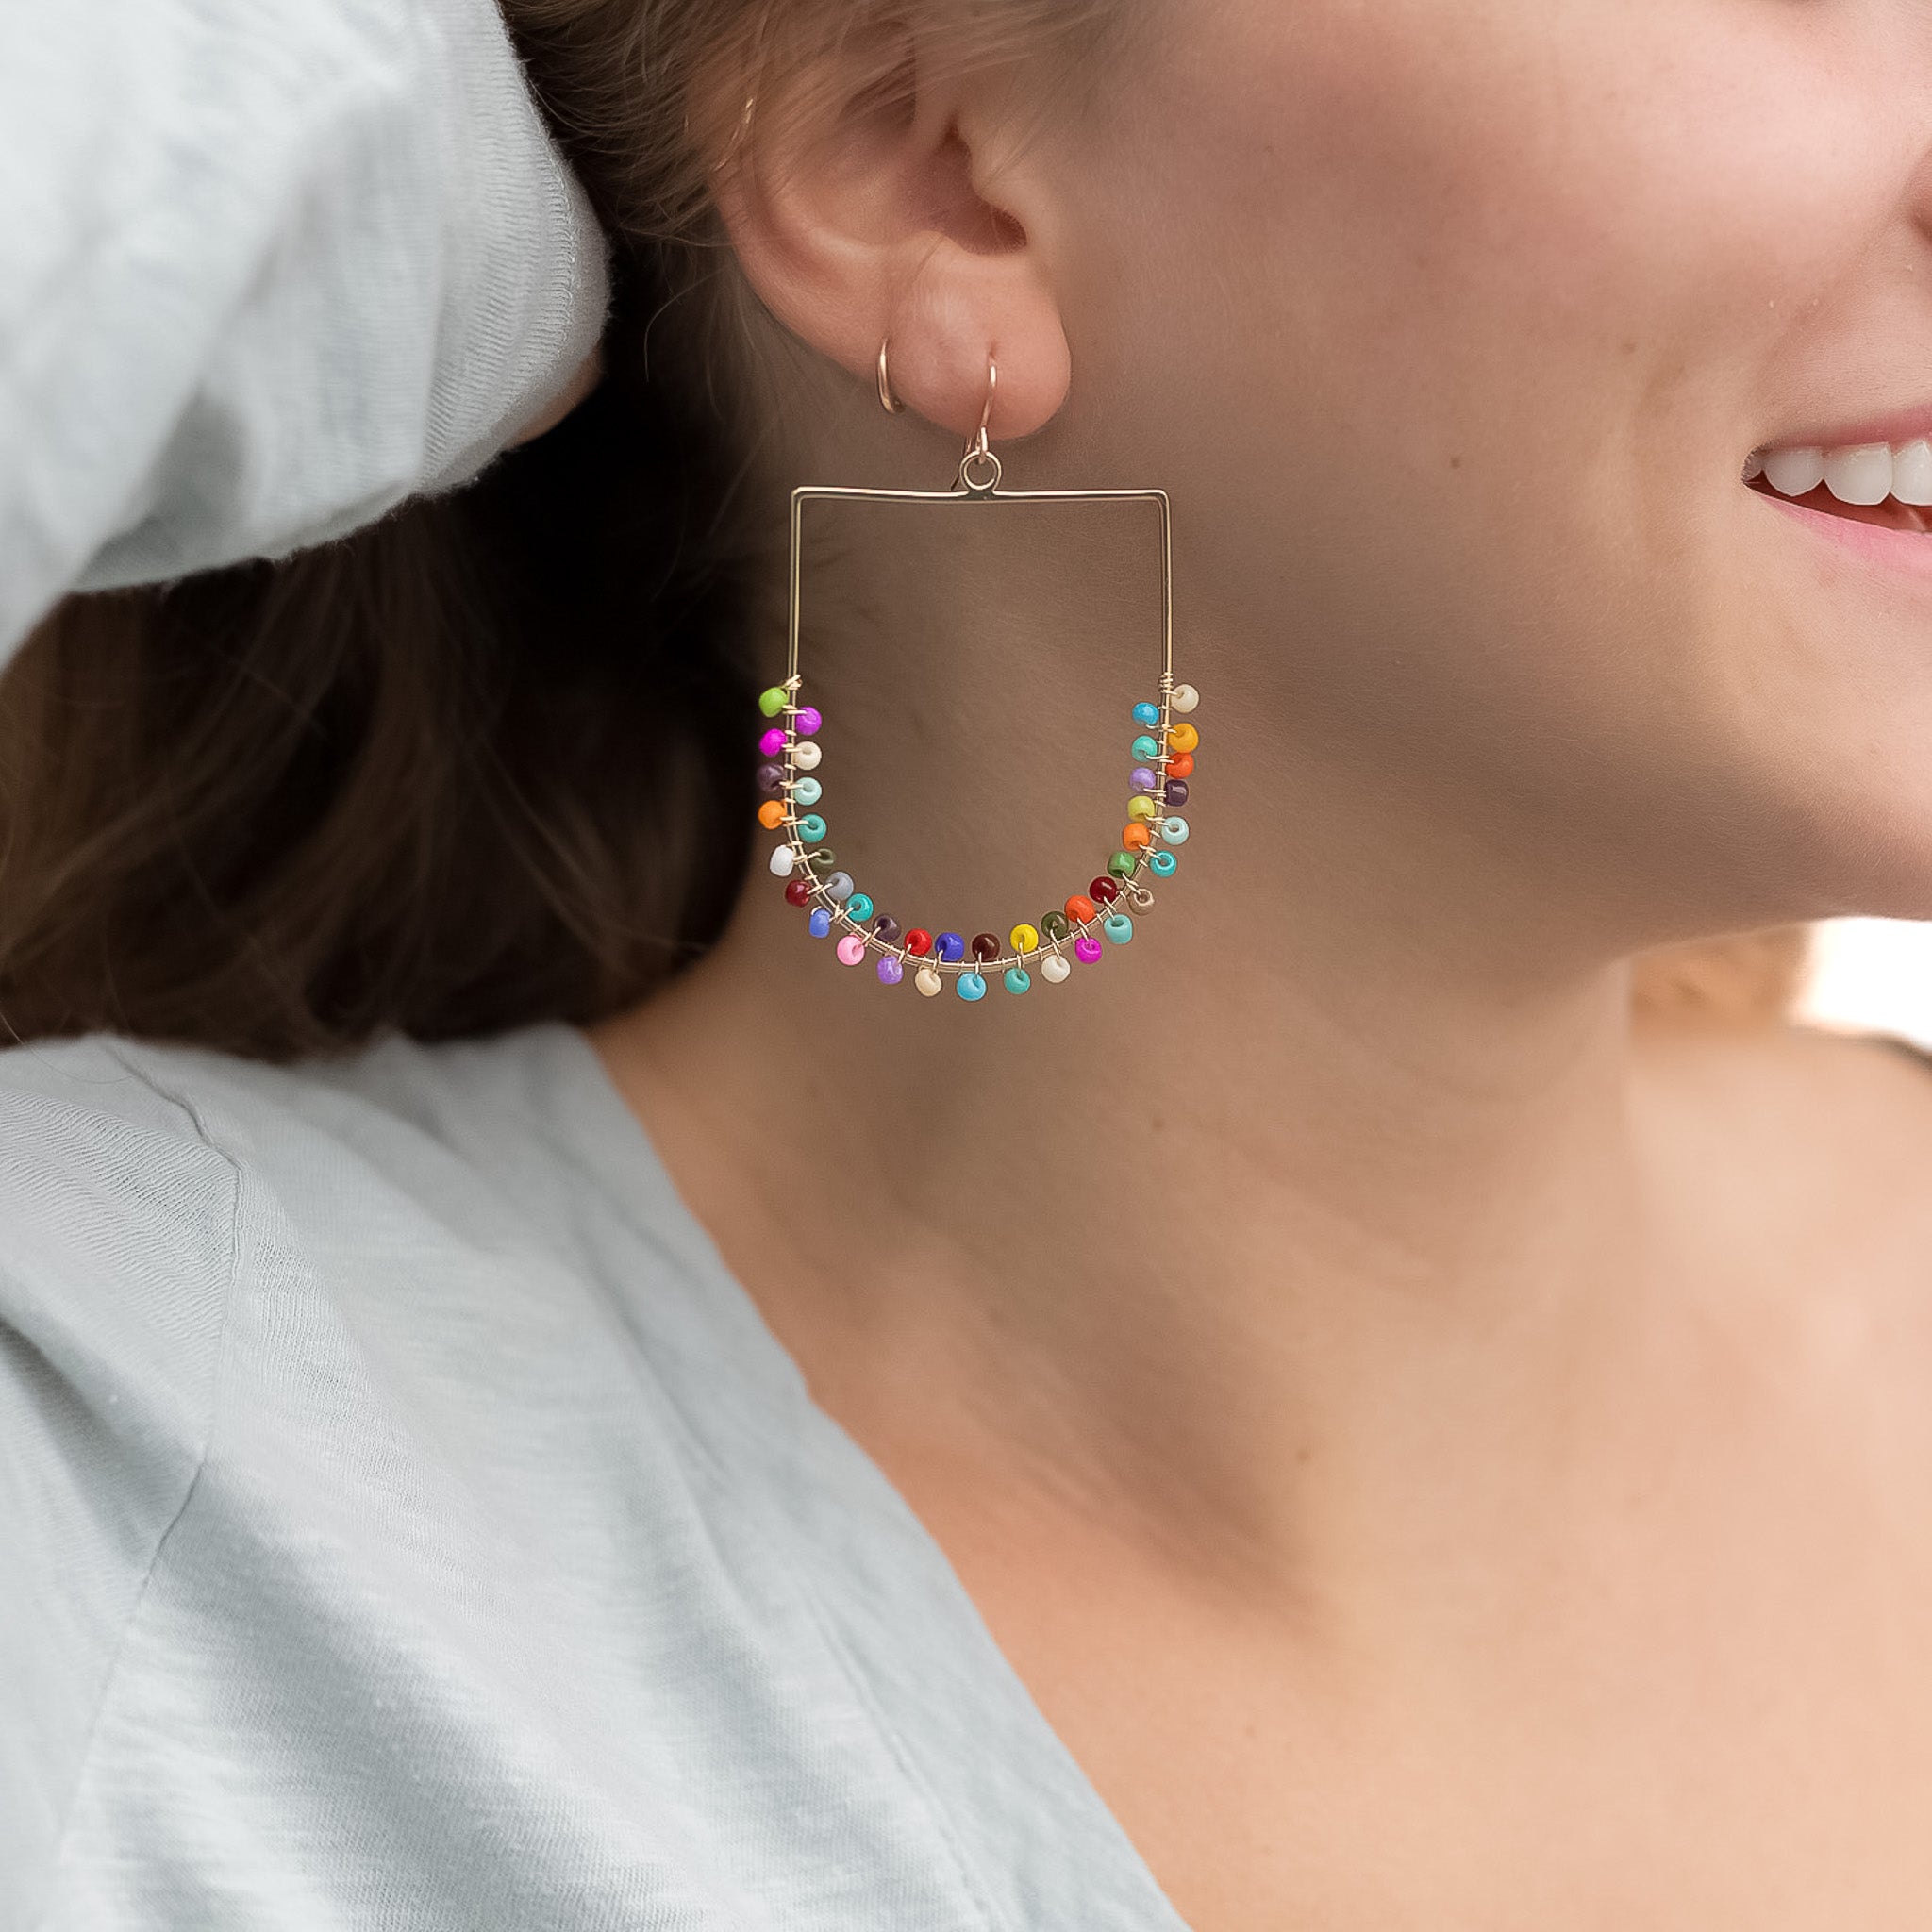 Gold rectangular earings with a curve on the bottom. Wrapped randomly with colorful beads filling the earrings halfway.